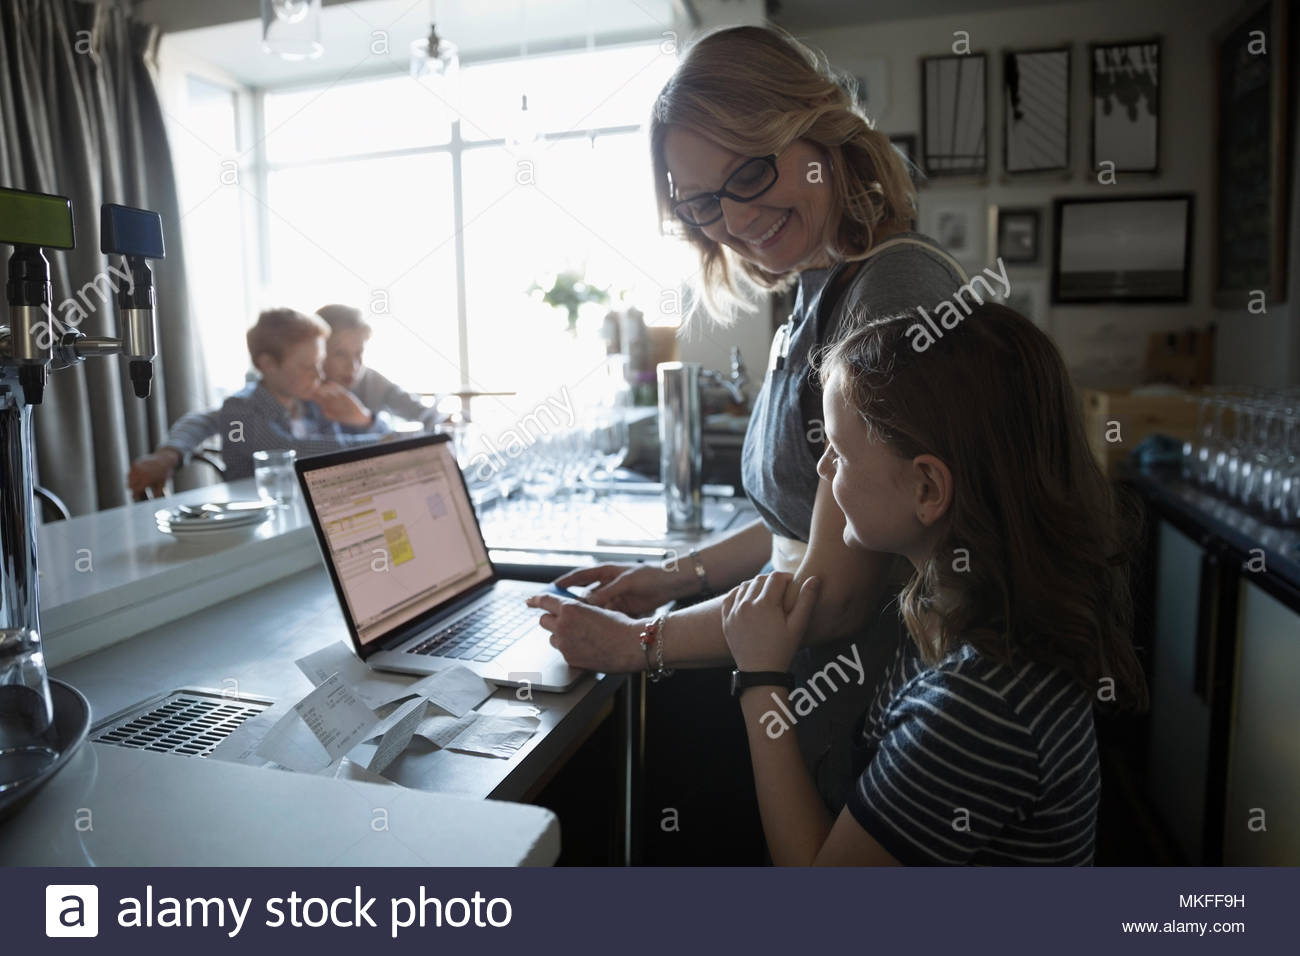 Family business owner mother and daughter working at laptop in cafe Stock Photo